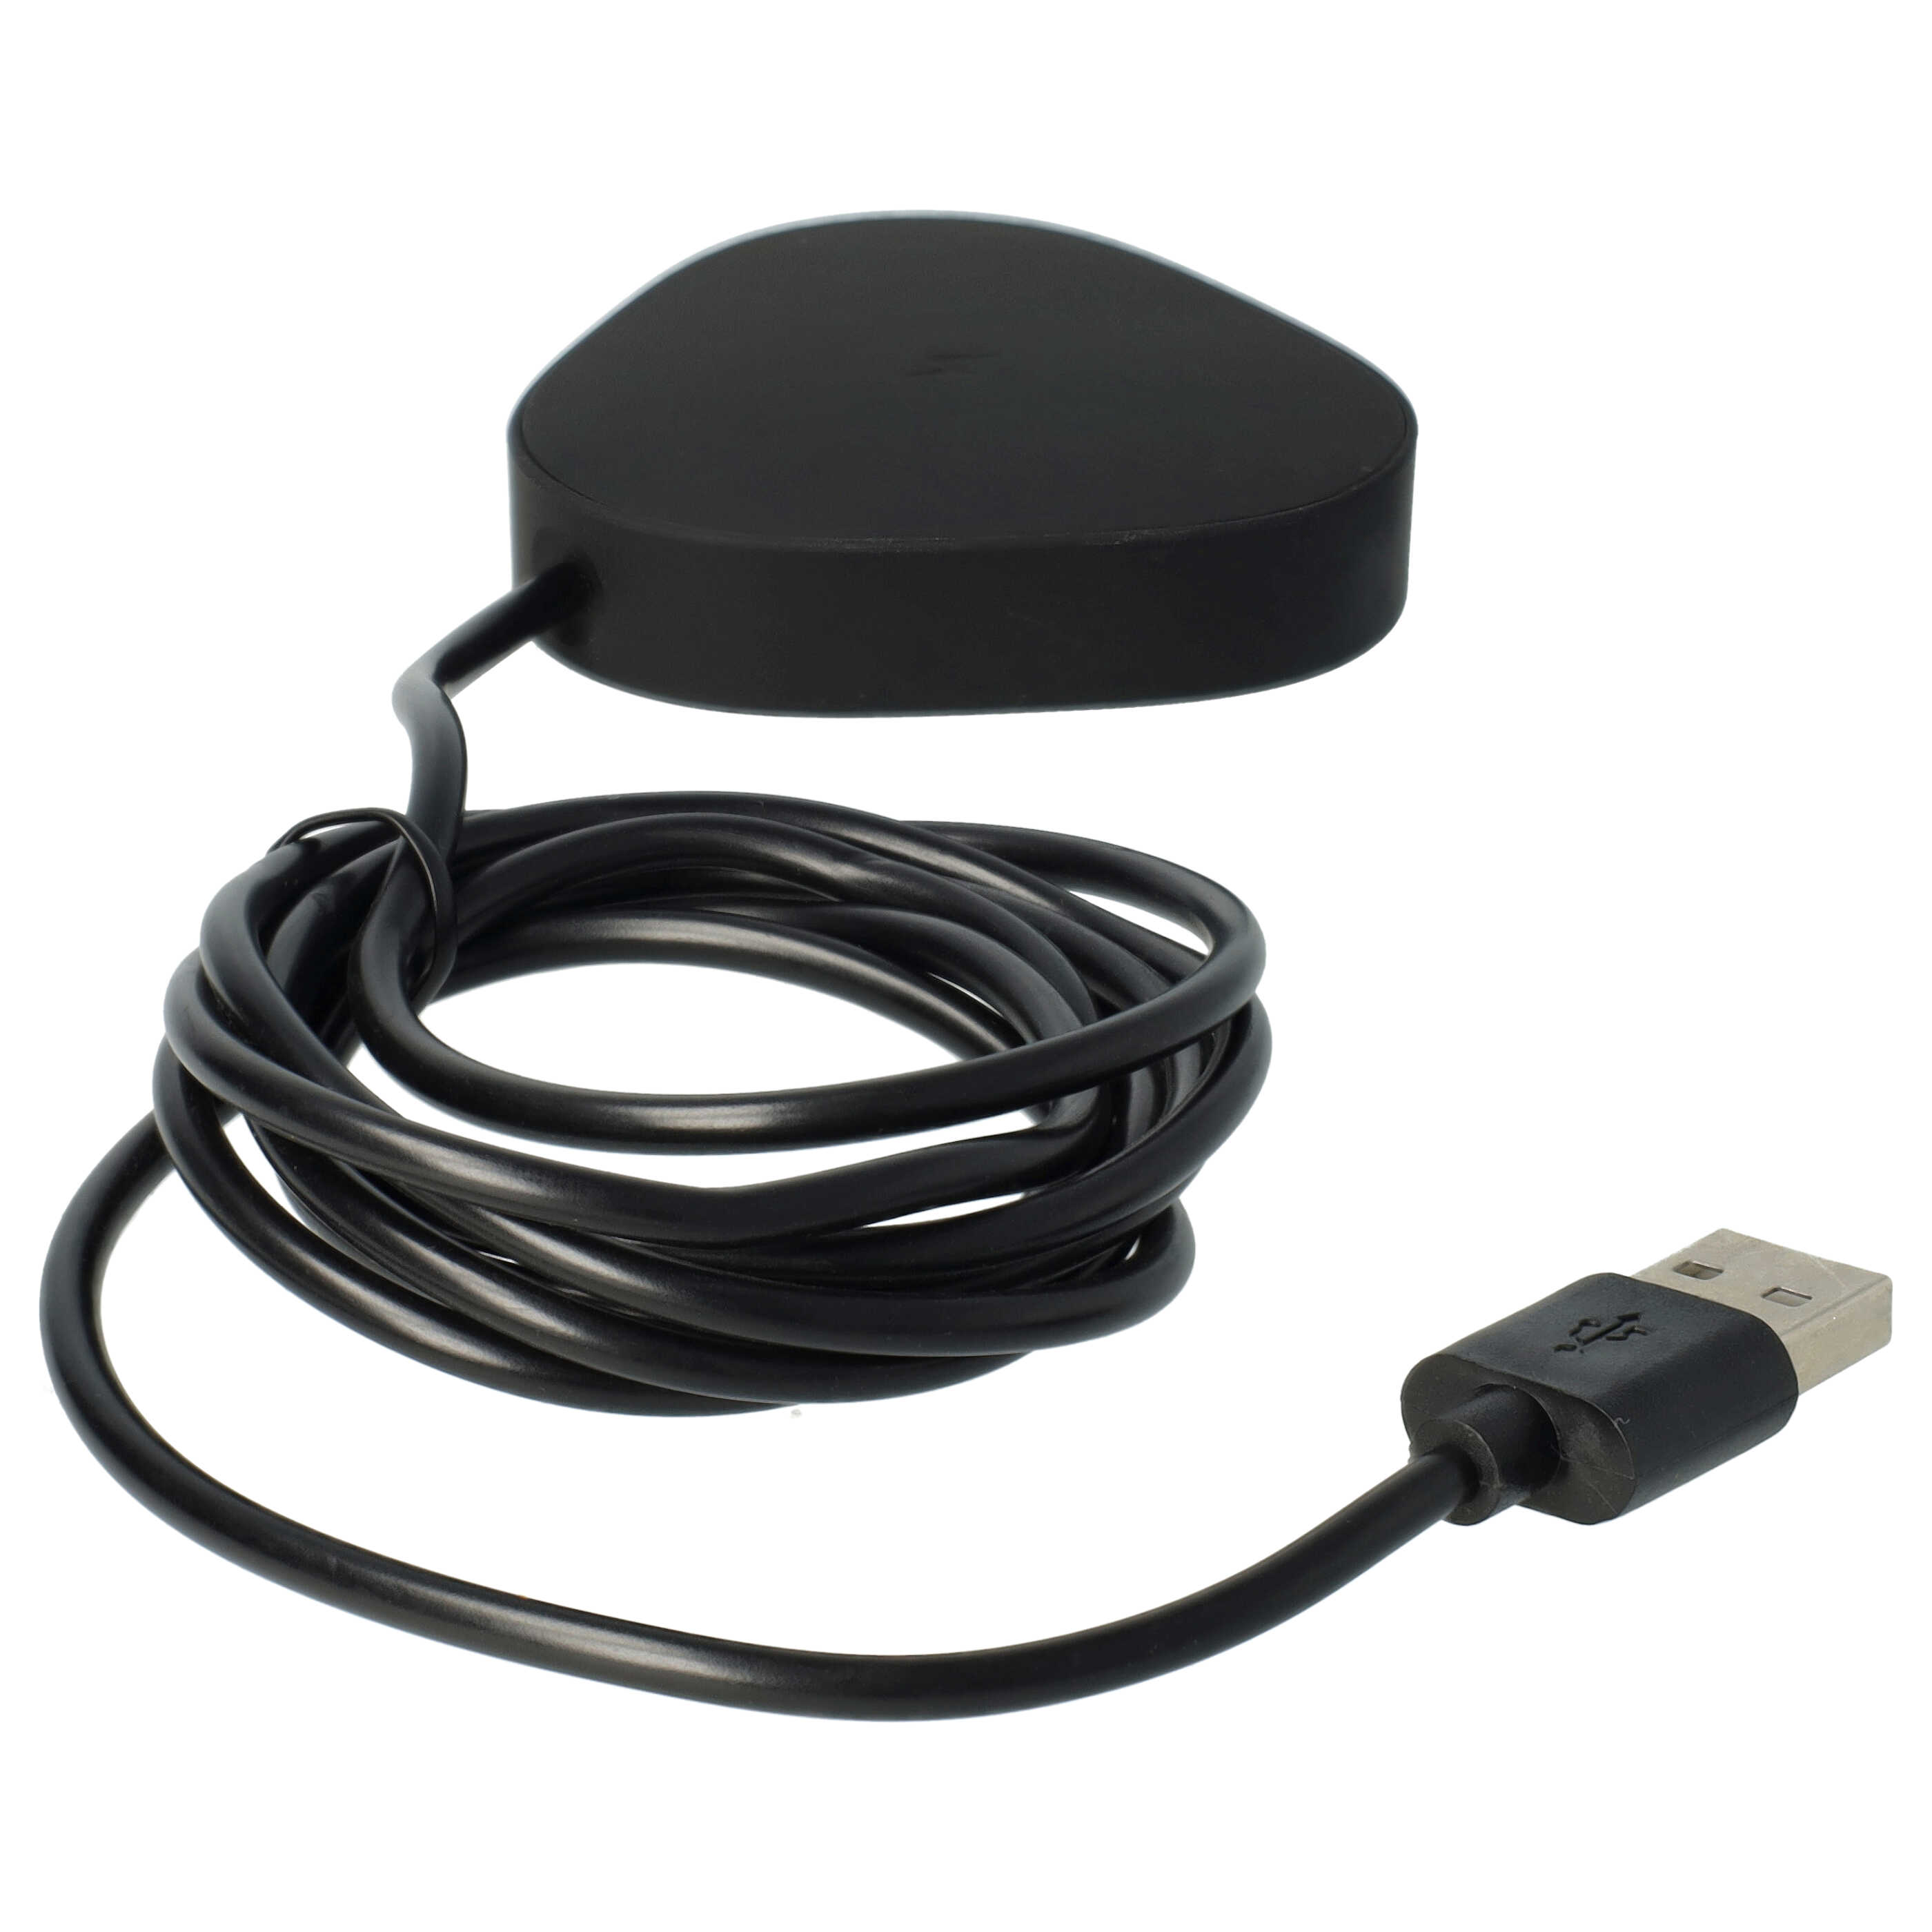 USB Charging Station as Replacement for Sonos Wireless Charger LPS-05WB-I - Charging Cable Black